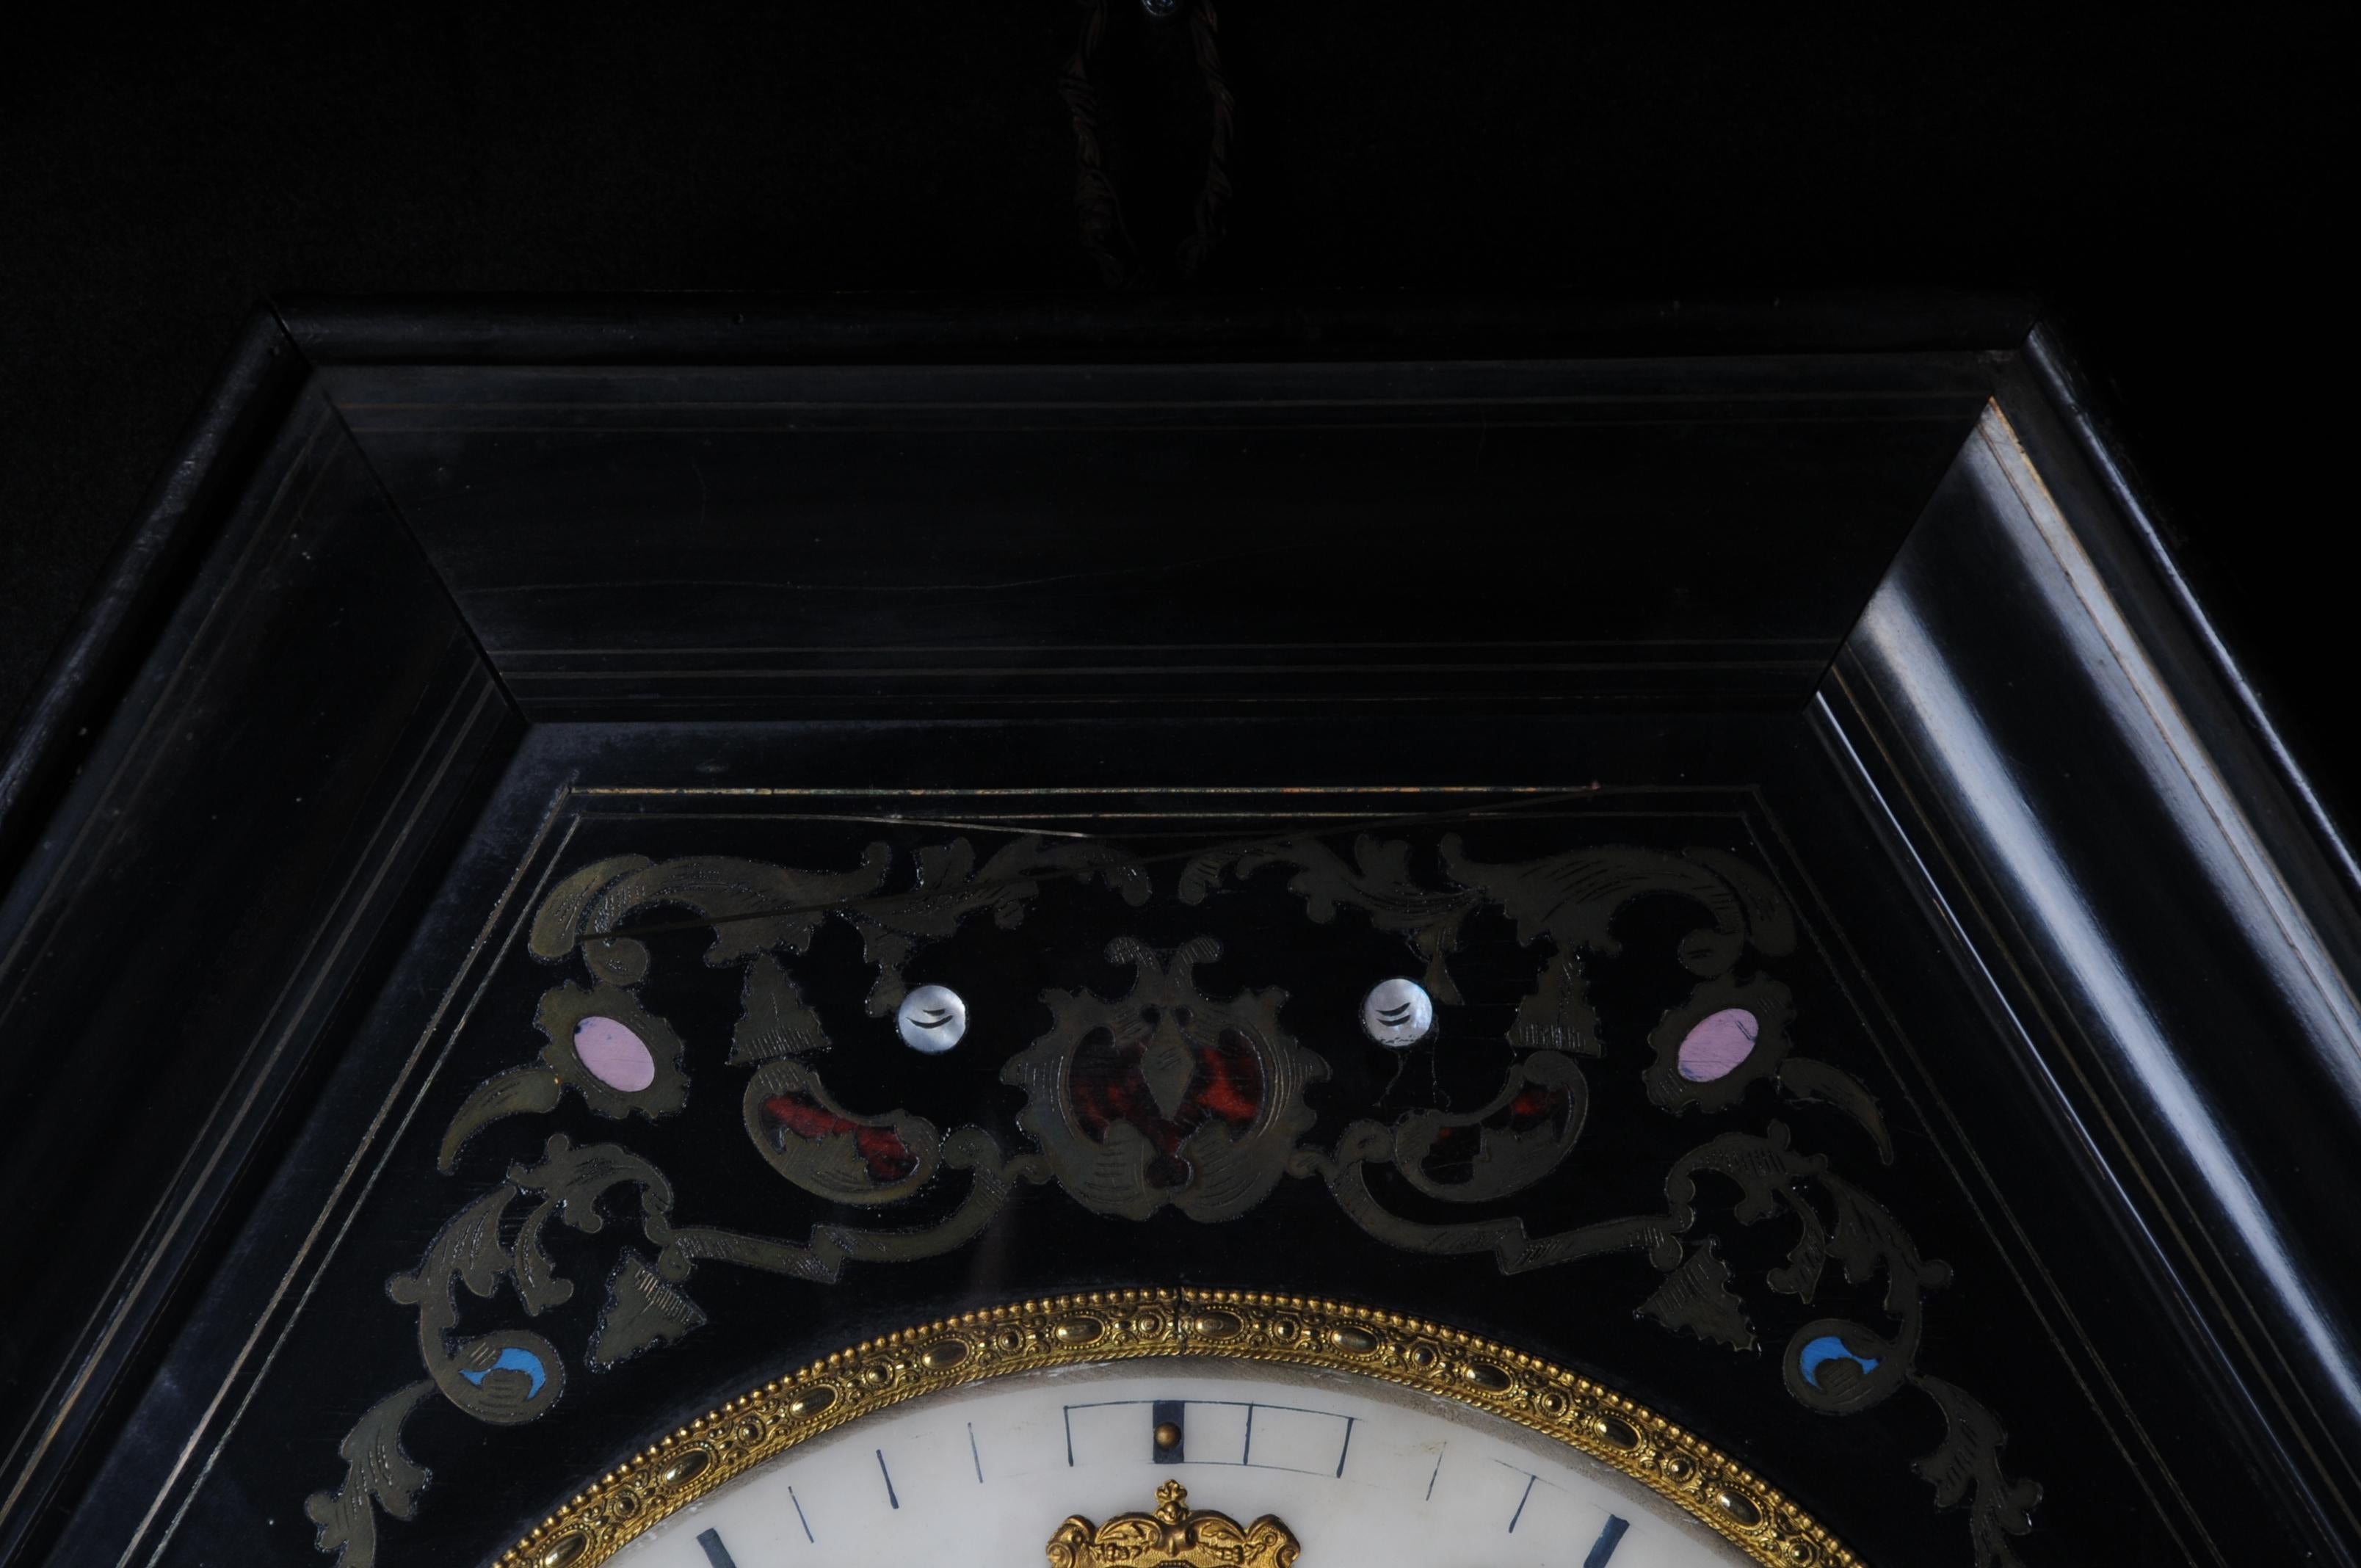 Fancy antique wall clock, circa 1850.

Octagonal-shaped and black-framed body with glazed door. White dial. Hand-inserted inlaid brass elements in Boulle technique. Movement must be checked for accuracy.

(R-59).